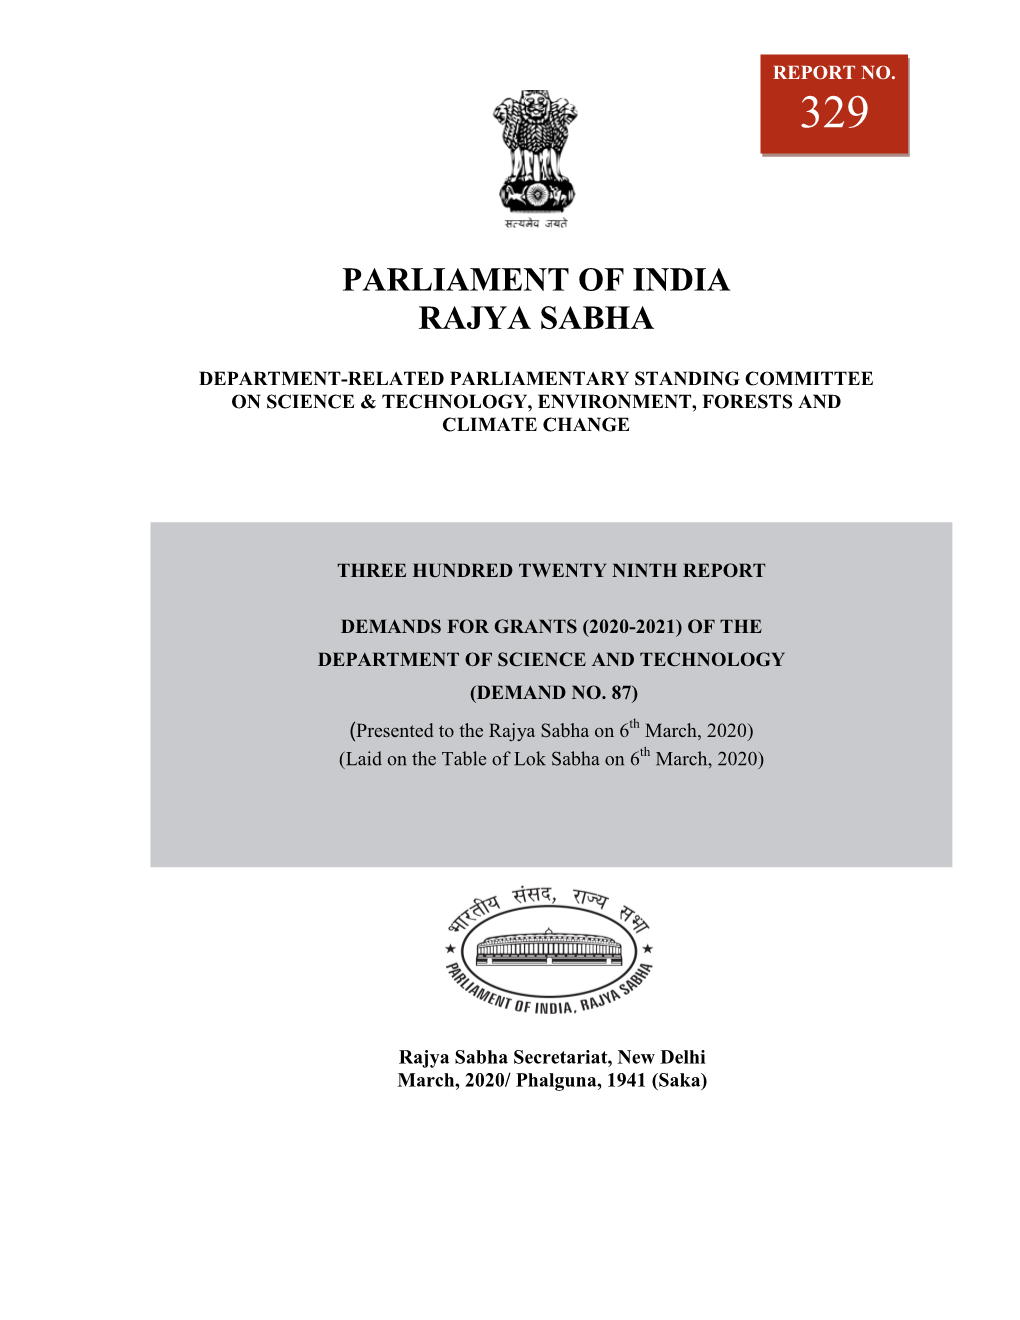 Parliament of India Rajya Sabha Department-Related Parliamentary Standing Committee on Science & Technology, Environment, Forests and Climate Change